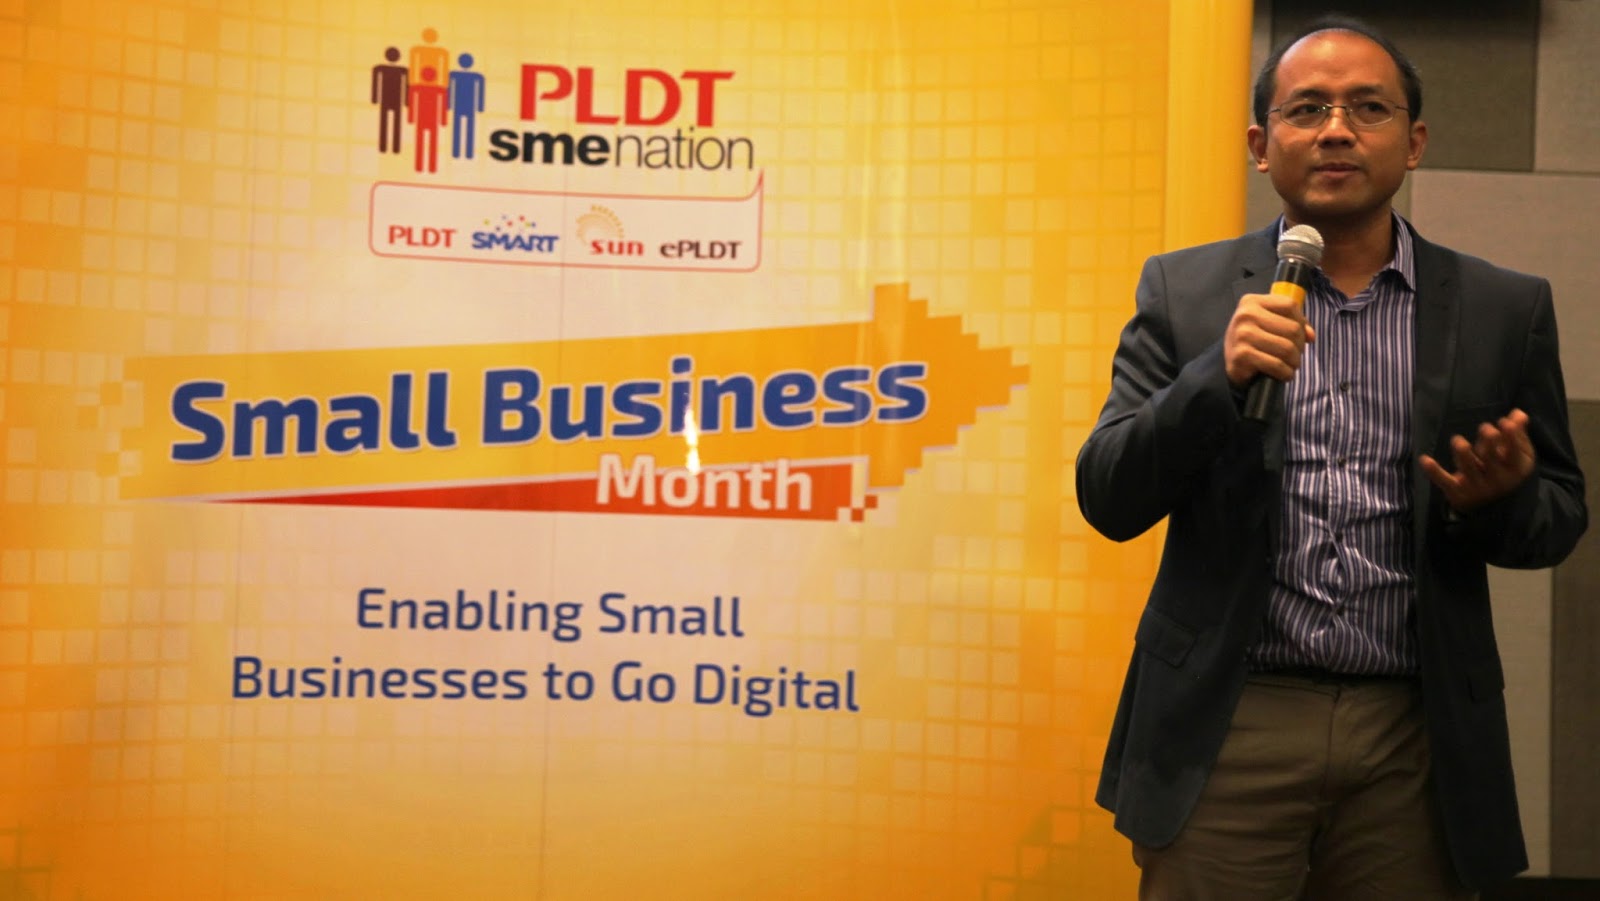 Google Apps for Work for SMEs now available via PLDT SME Nation